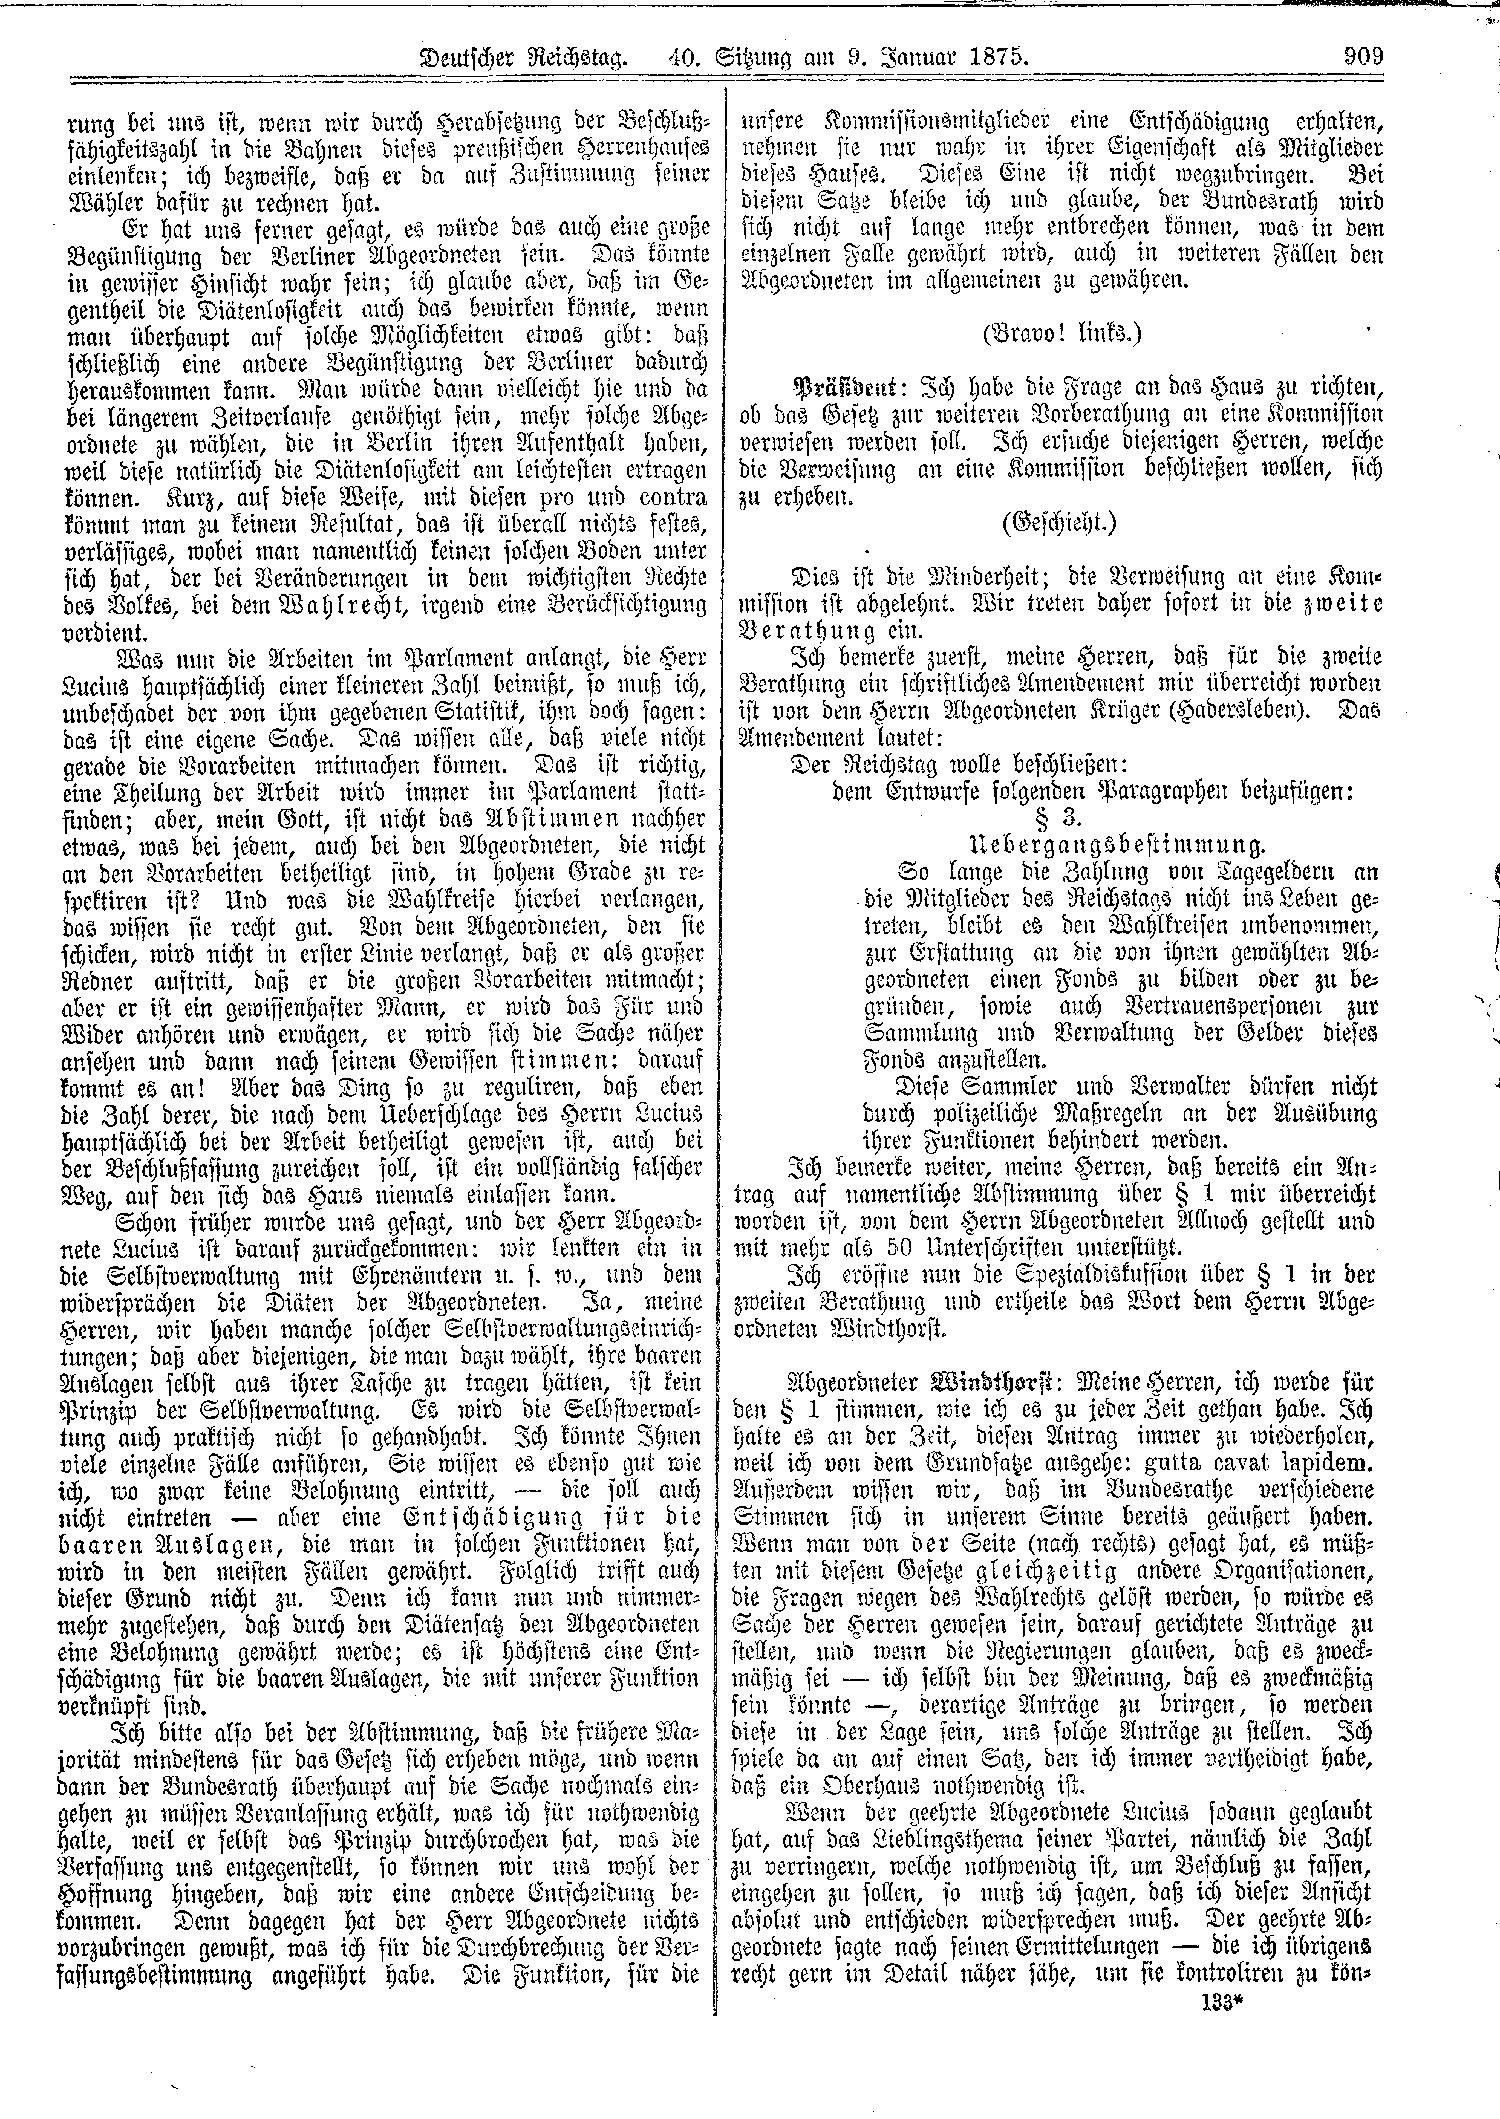 Scan of page 909